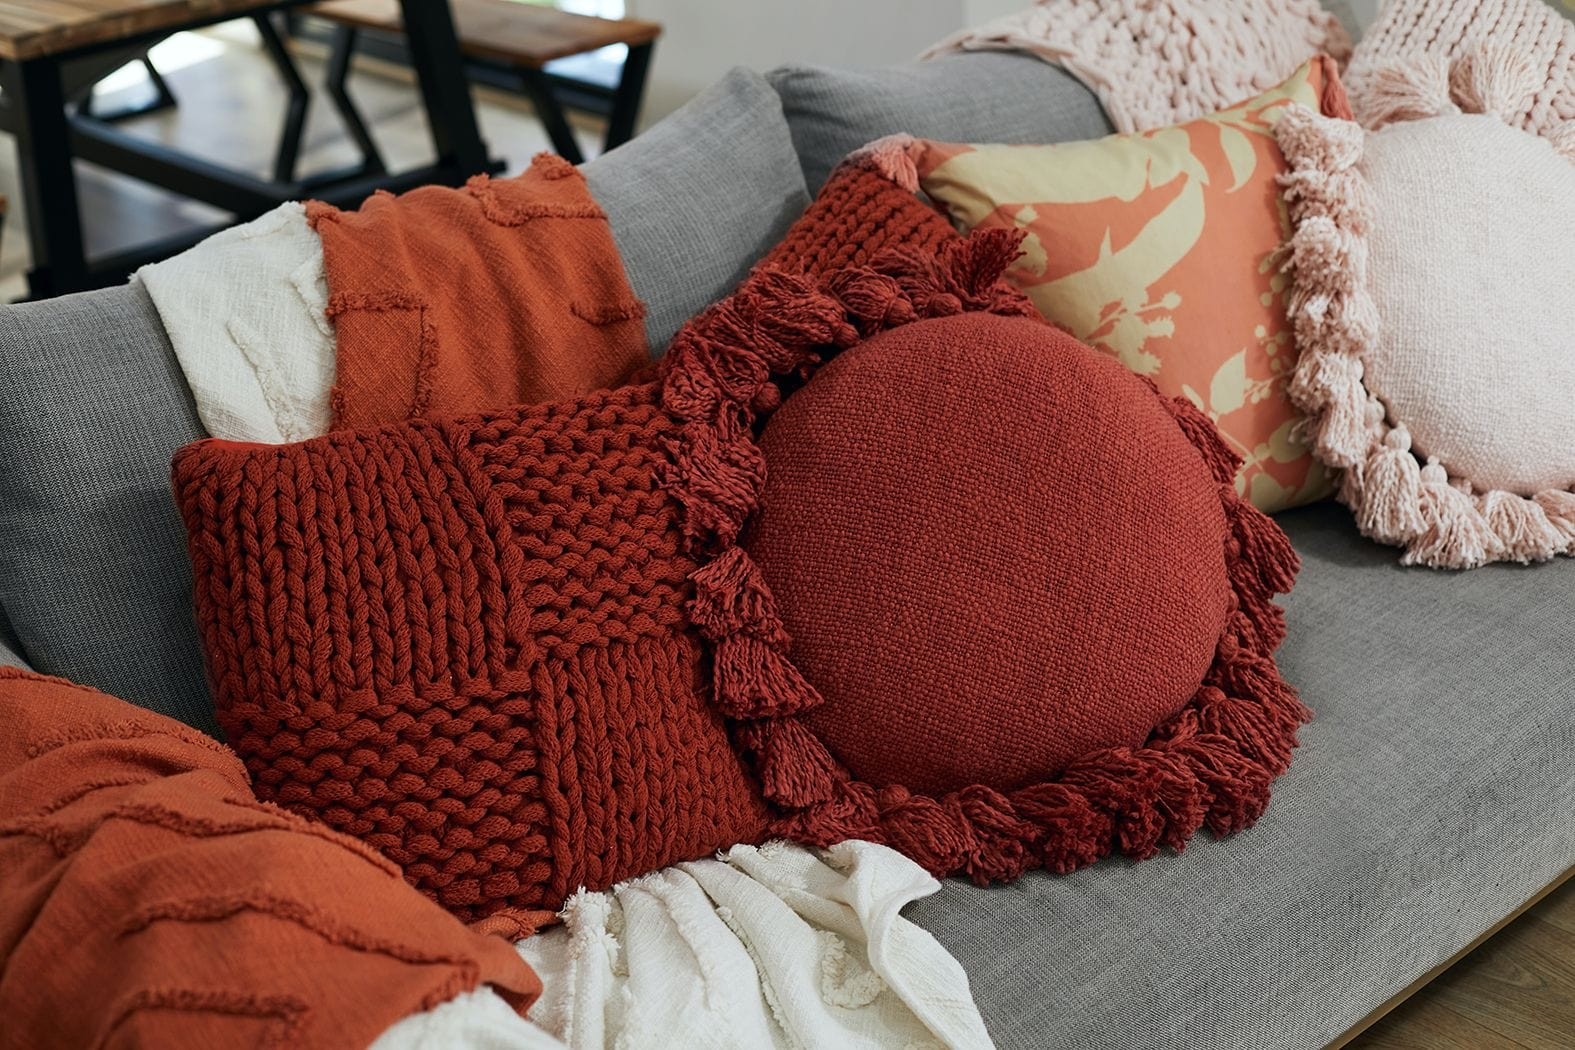 burnt orange and terracotta cushions and throws on grey sofa from lorraine lea